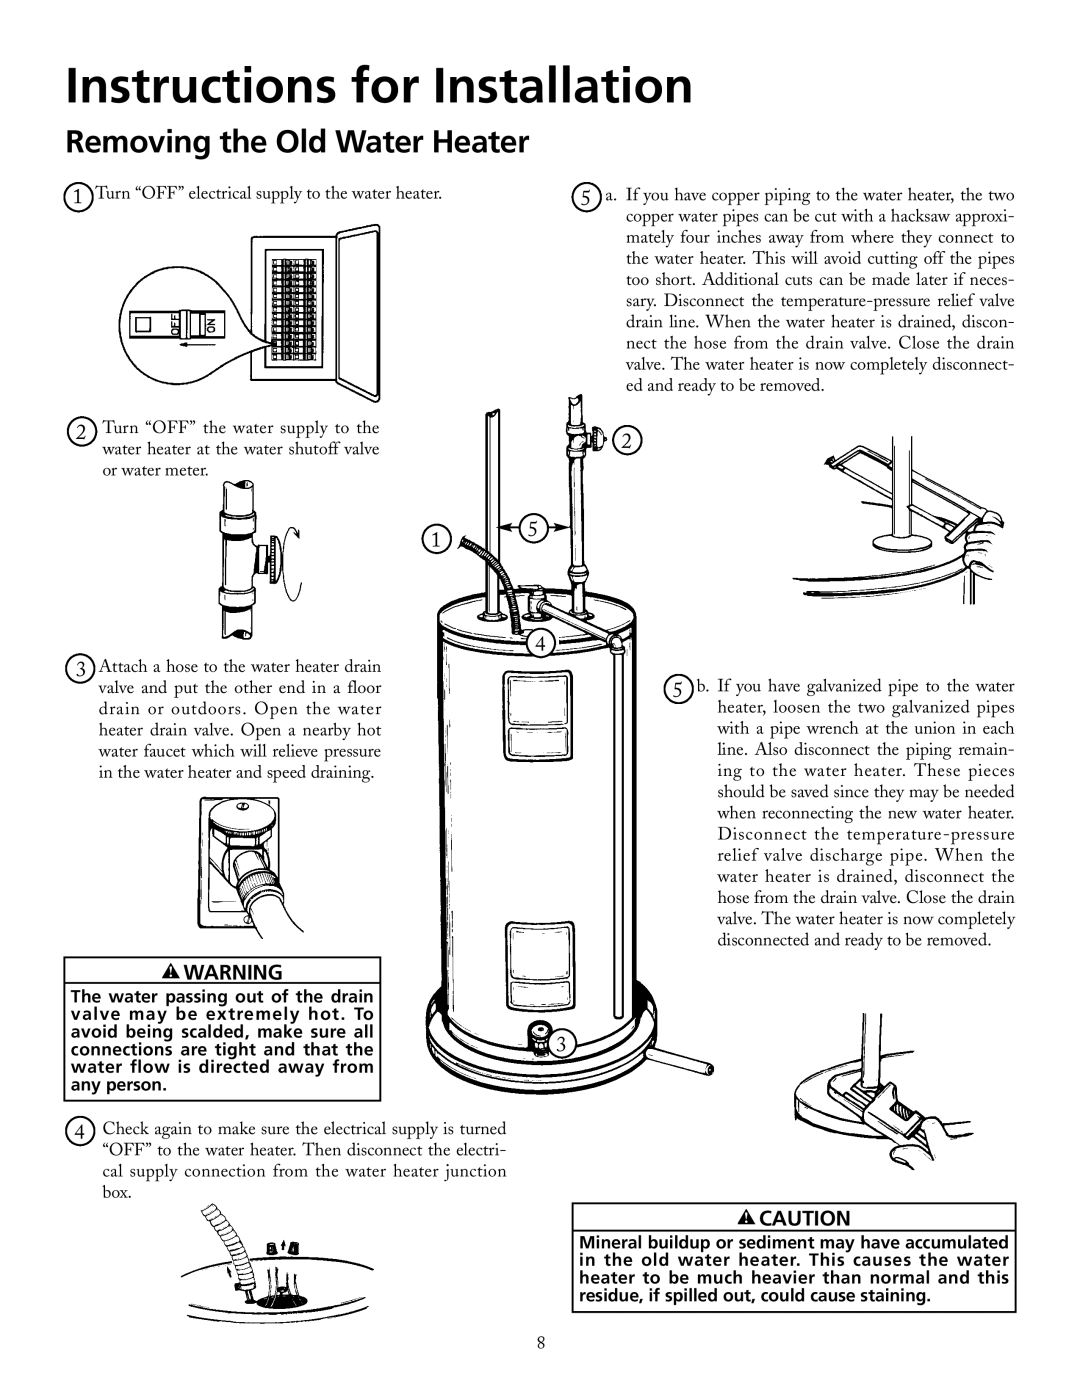 Maytag HRE3940T, HRE3966T, HRE3950T, HRE2950T, HRE2940T, HRE2950S Instructions for Installation, Removing the Old Water Heater 